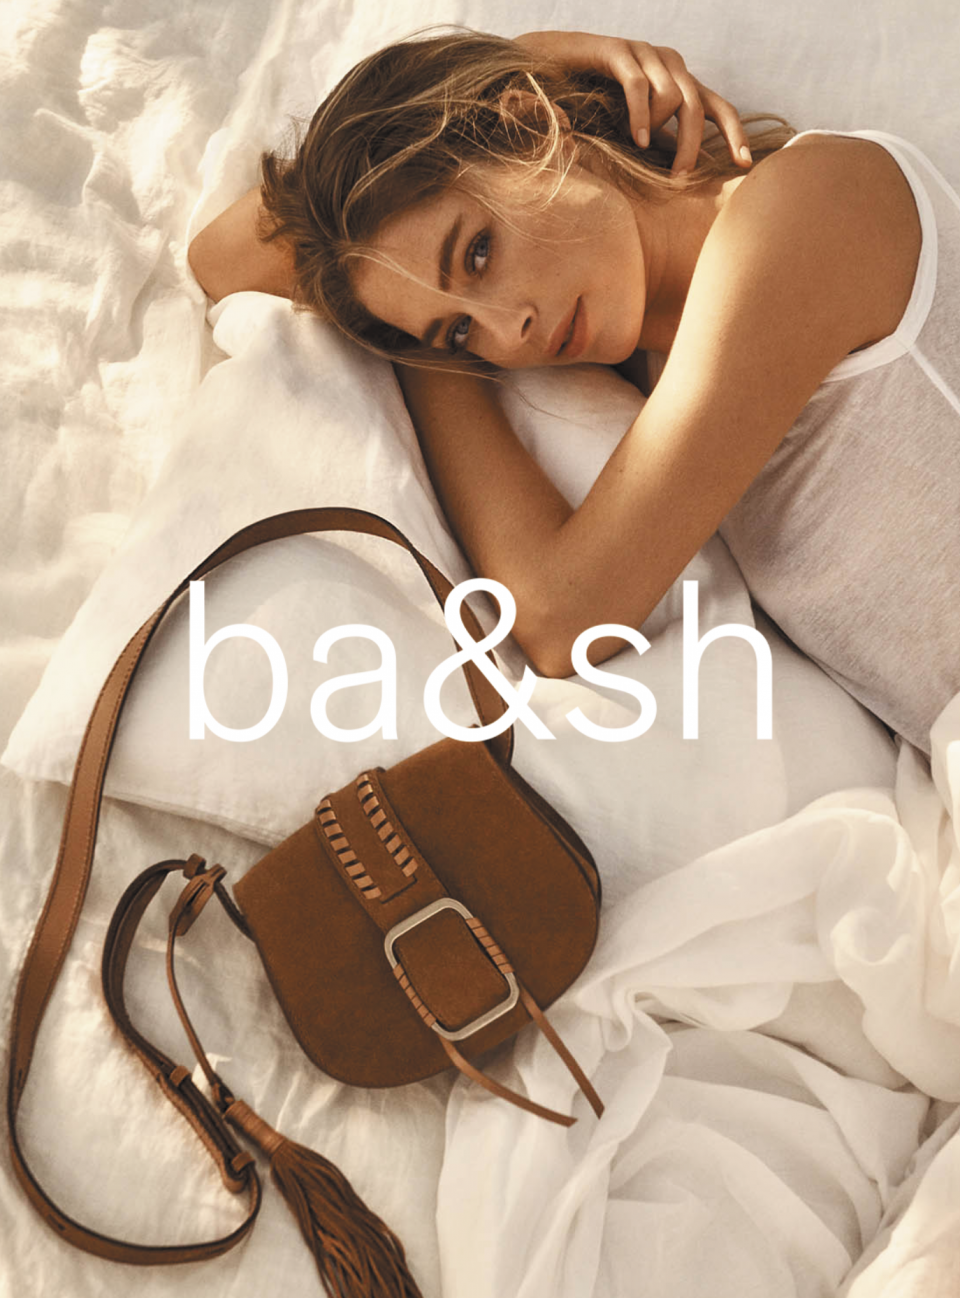 ba&sh campaign "in bed with my Teddy"